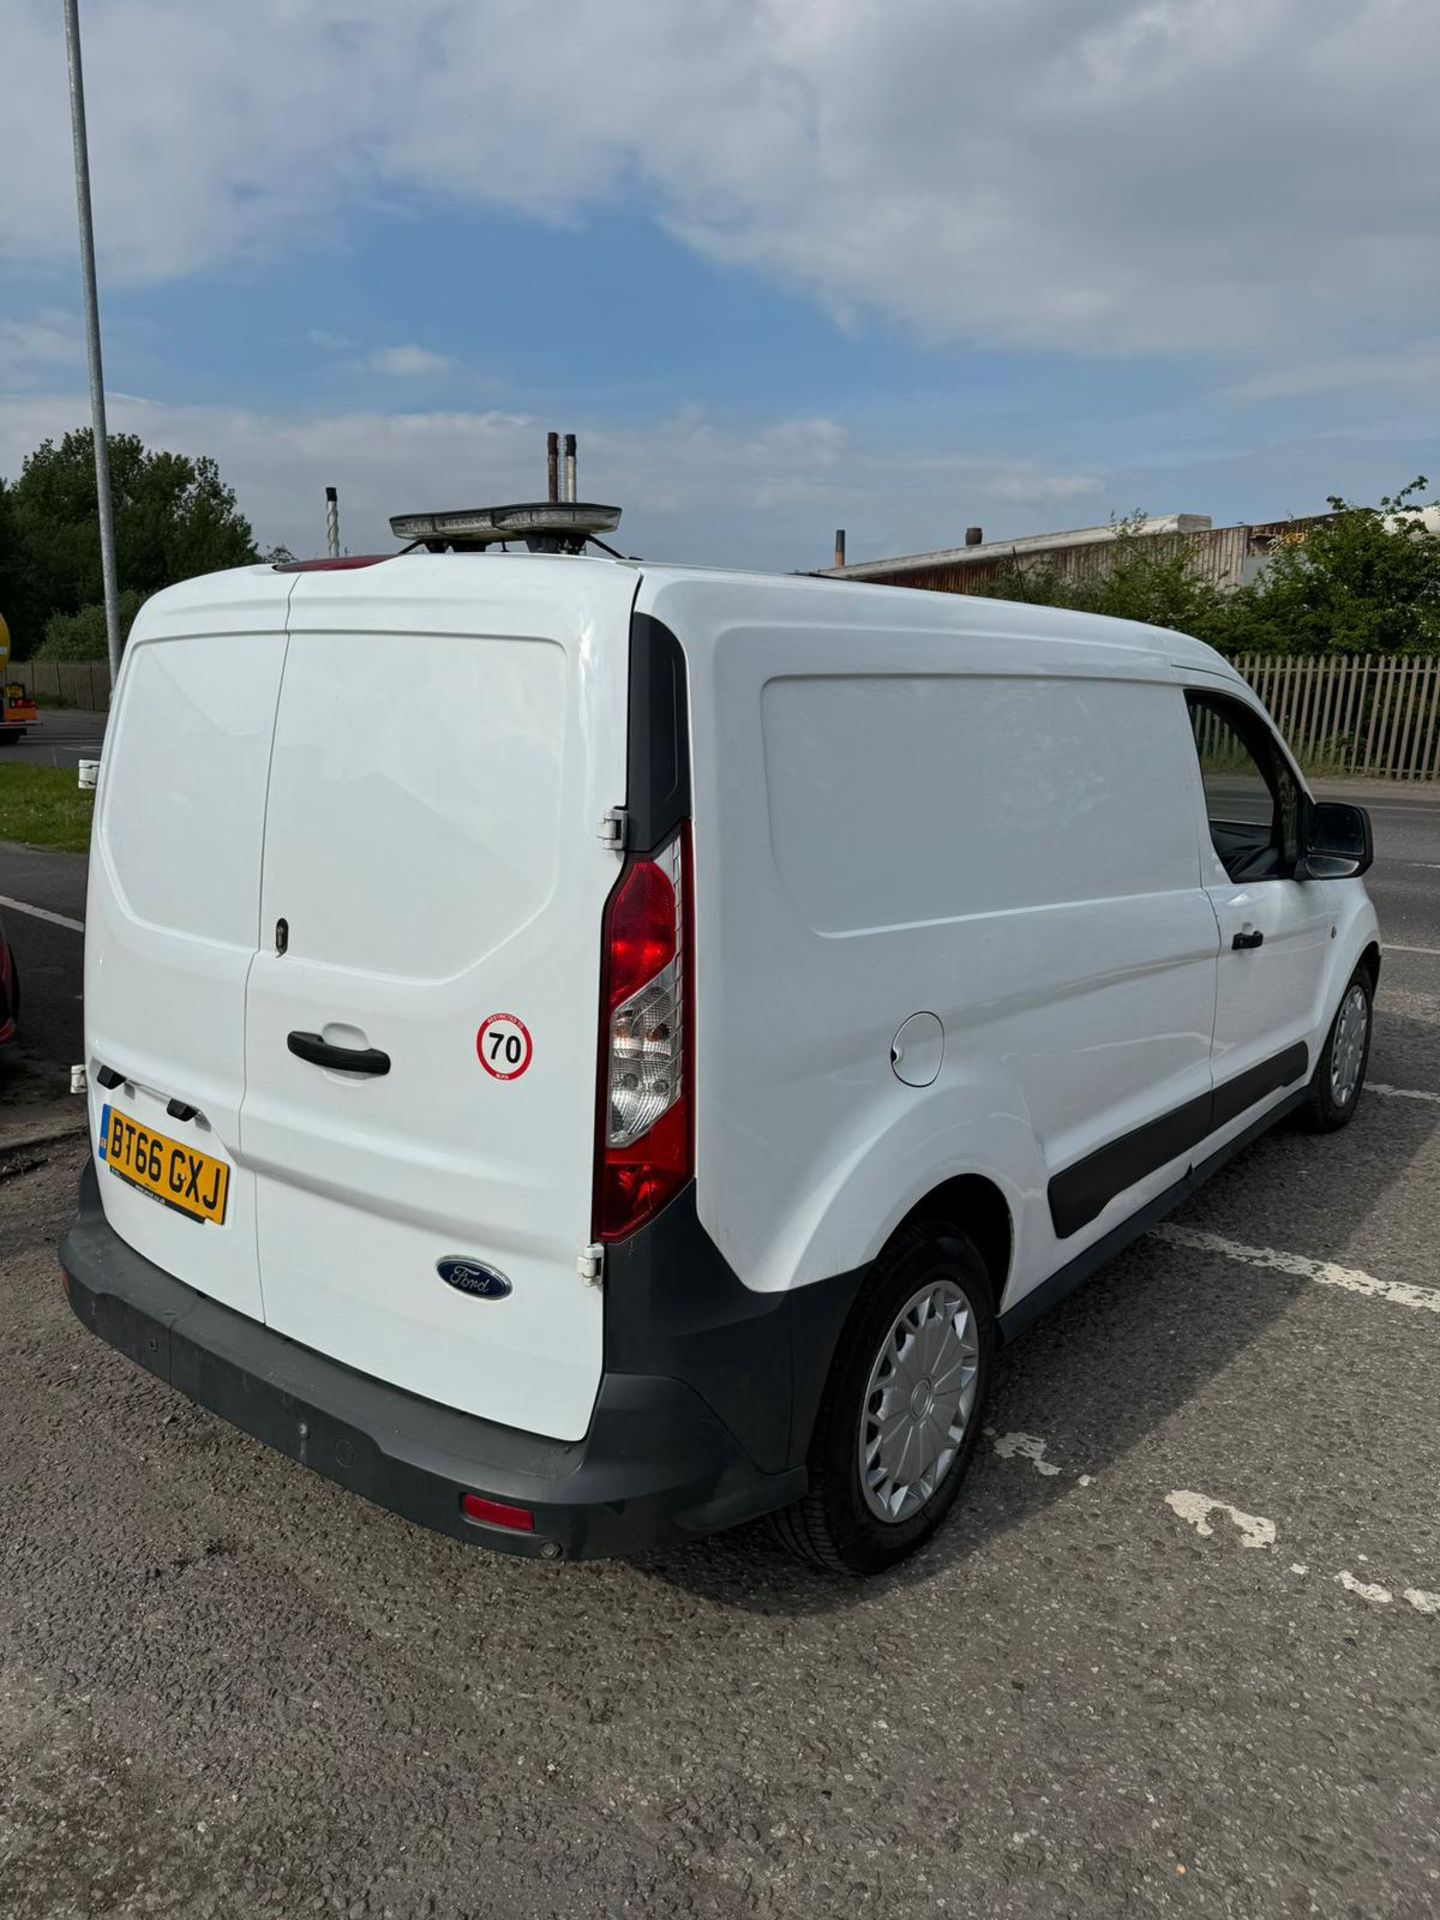 2016 66 FORD TRANSIT CONNECT LWB PANEL VAN - 123K MILES - AIR CON - Image 2 of 6